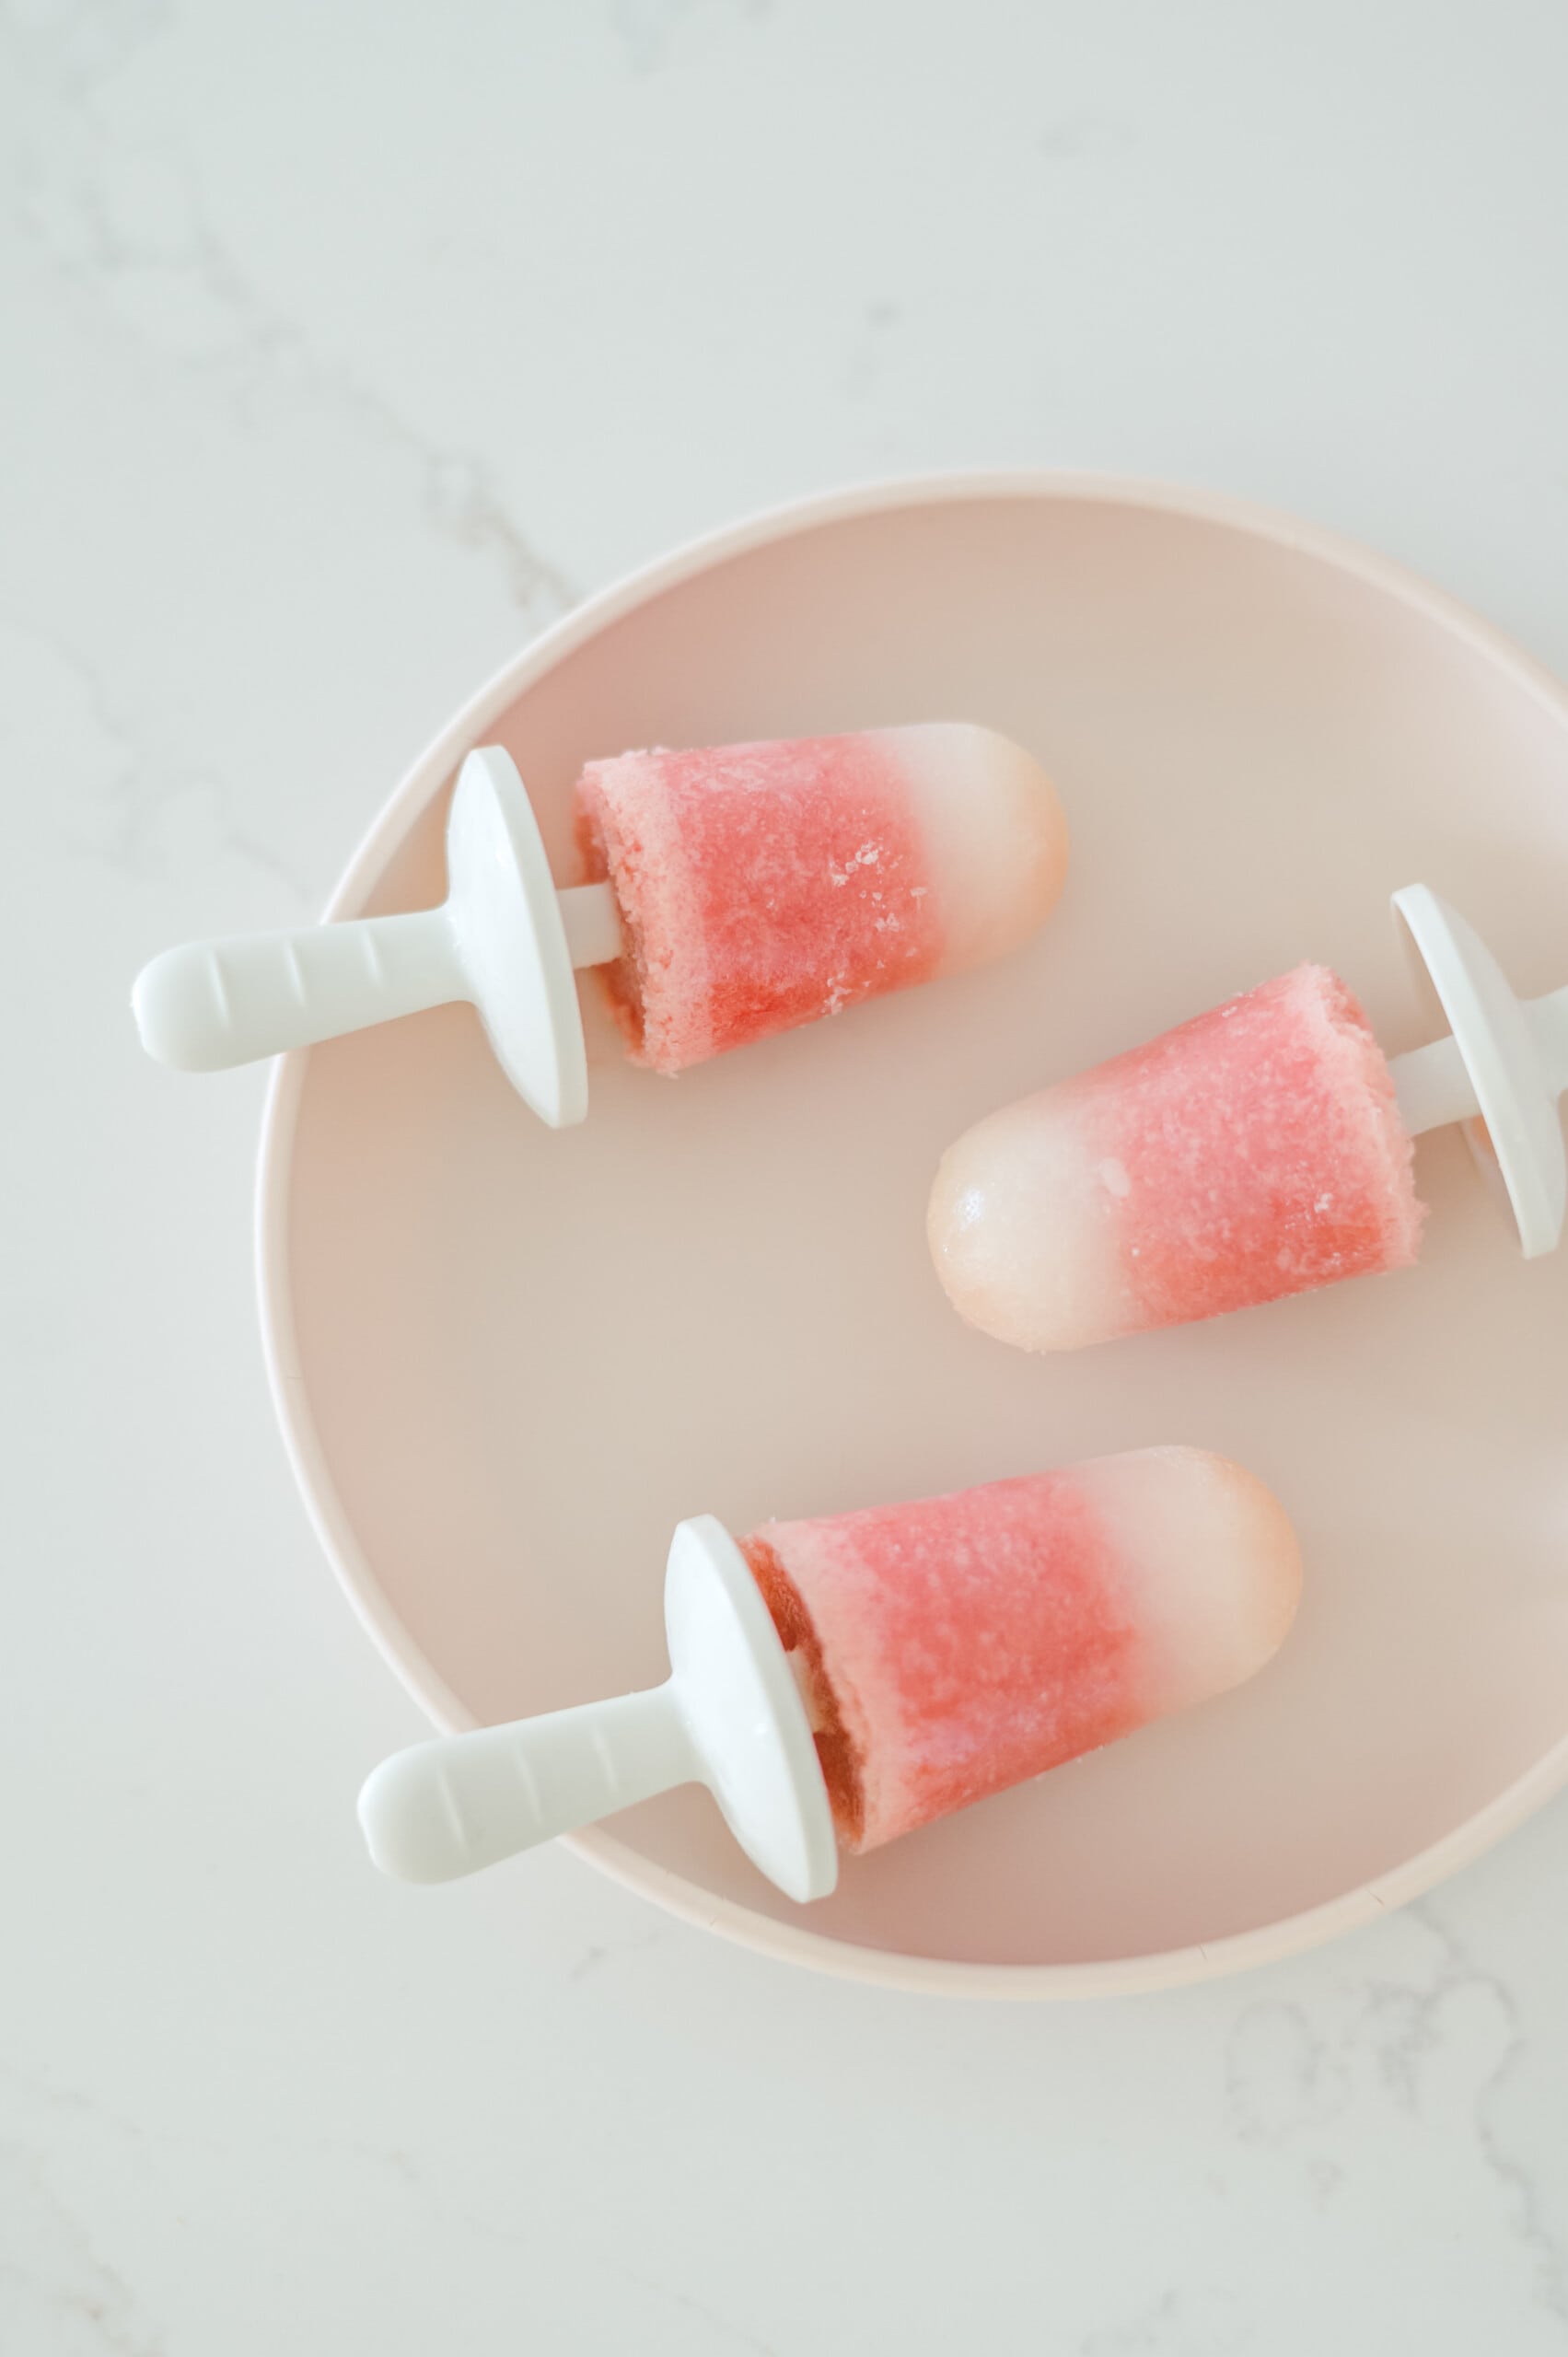 Plate of three small watermelon popsicles on top of a white kitchen counter.